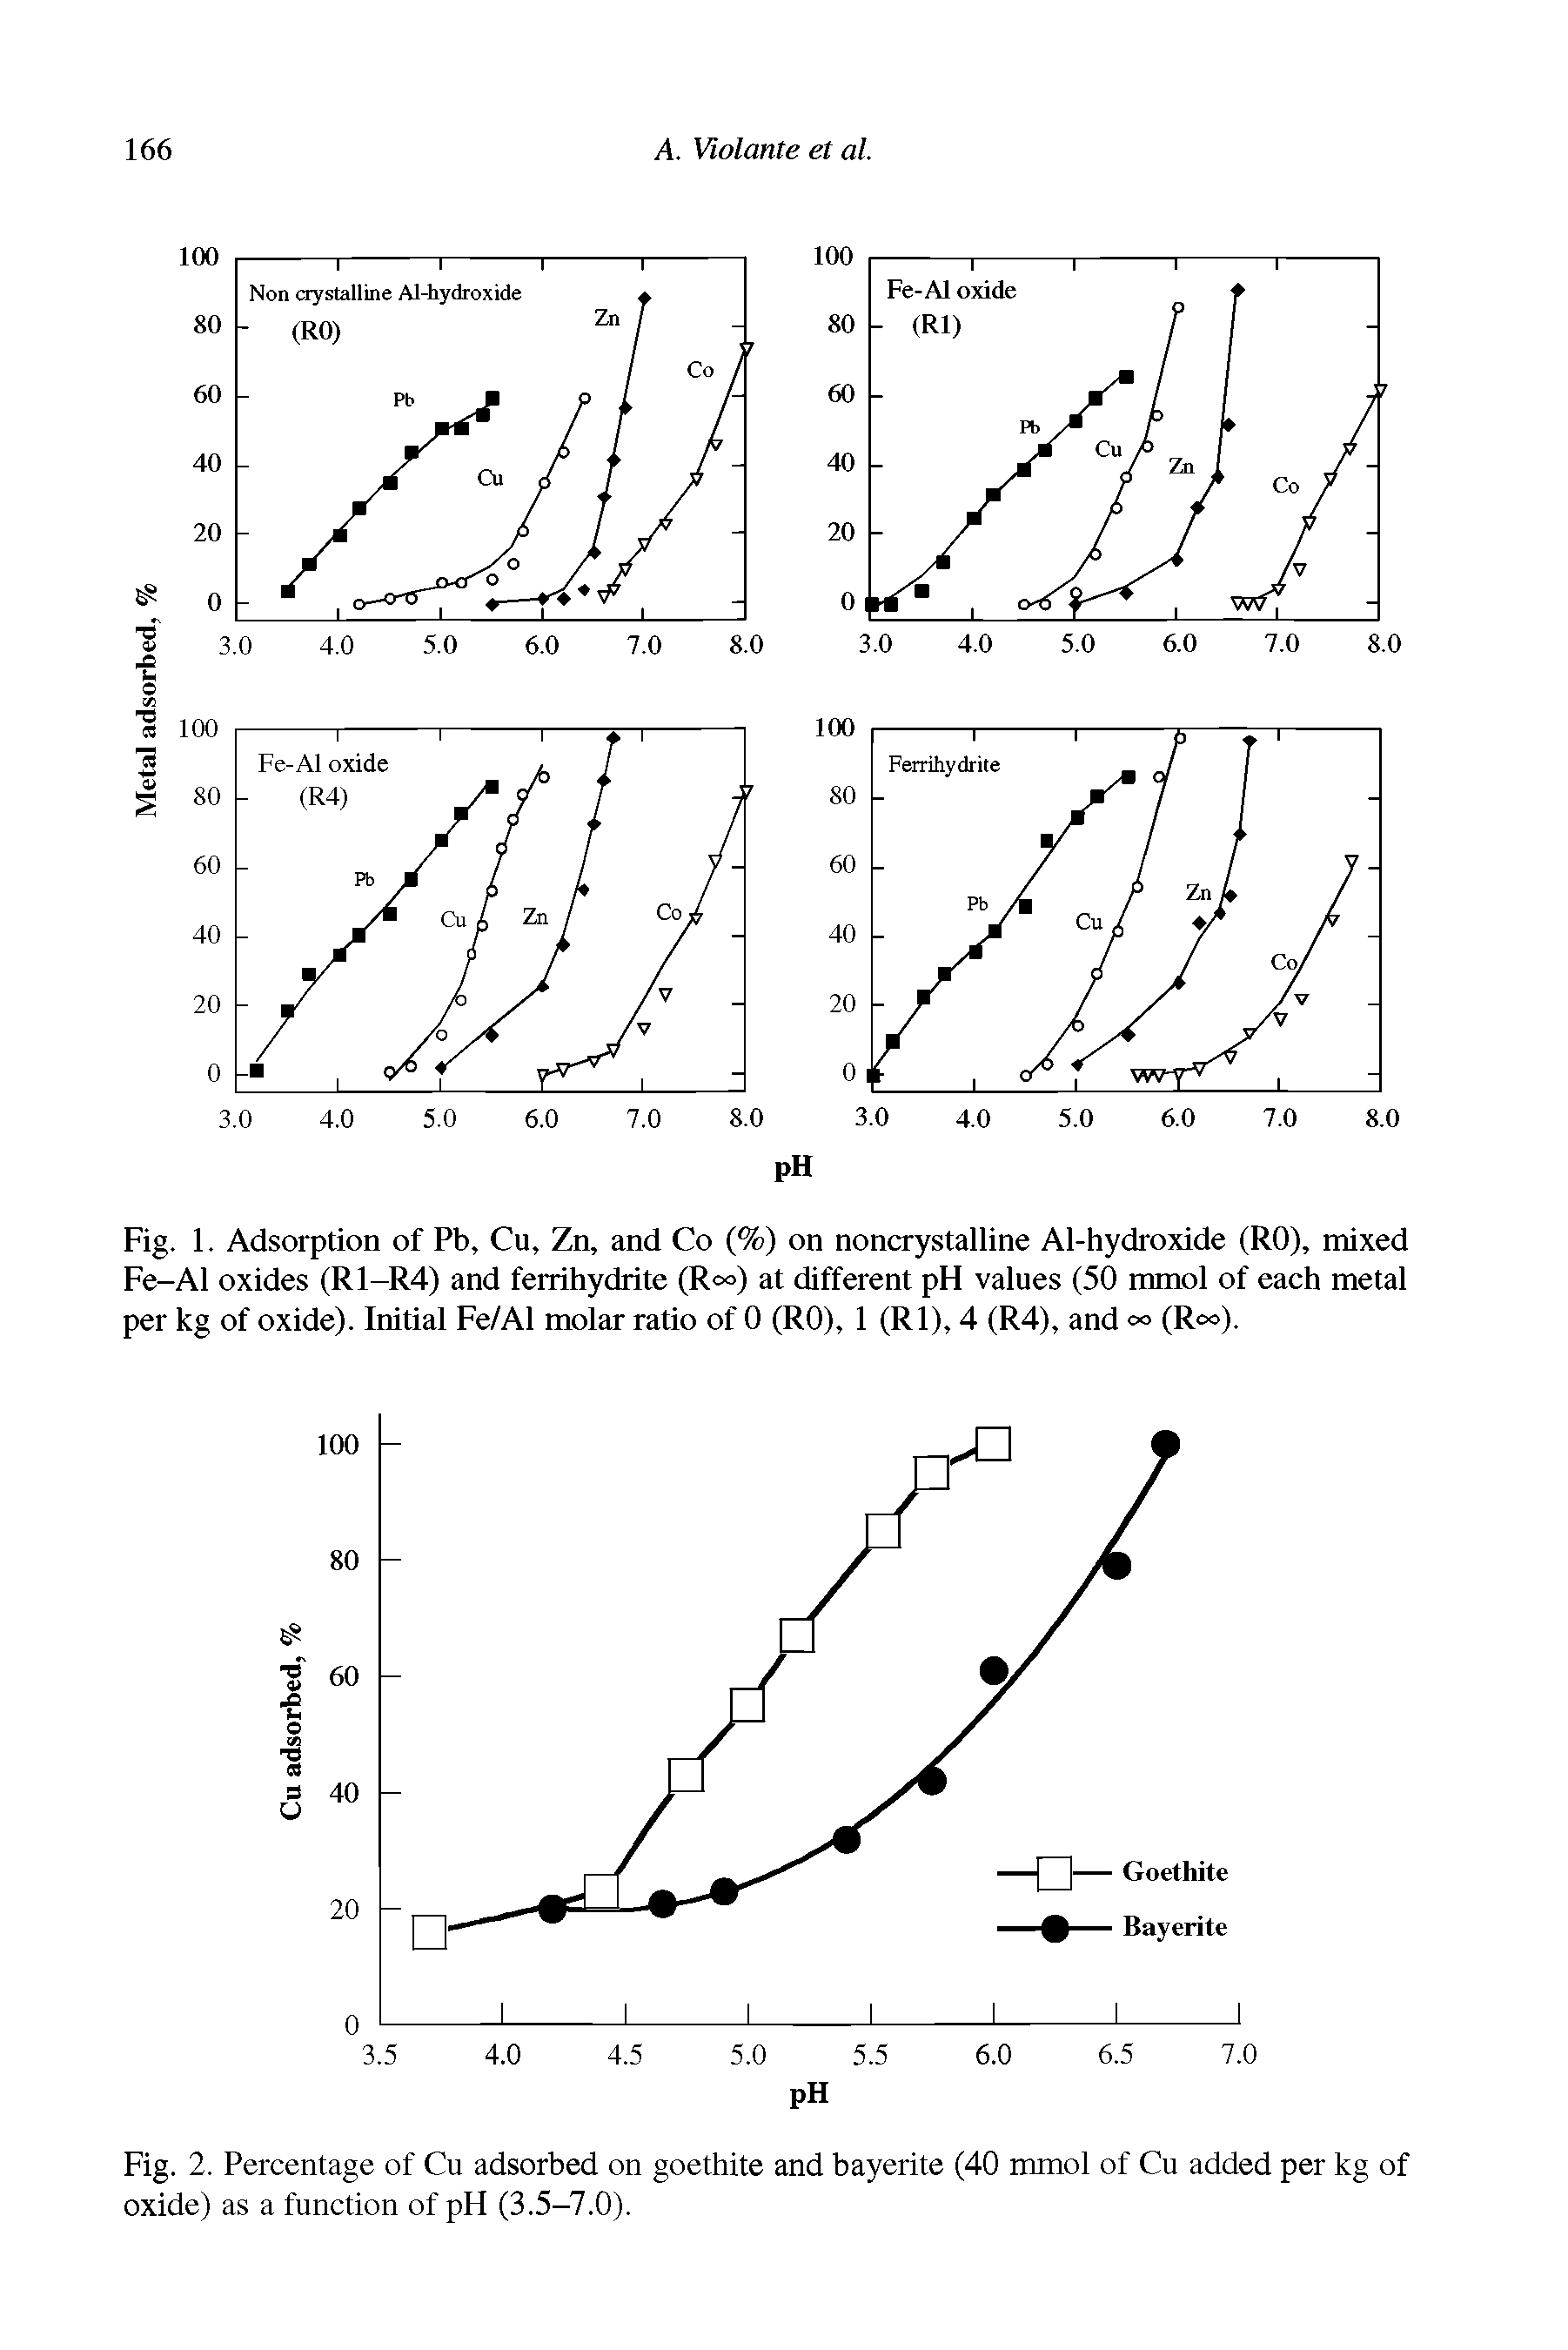 Fig. 2. Percentage of Cu adsorbed on goethite and bayerite (40 mmol of Cu added per kg of oxide) as a function of pH (3.5-7.0).